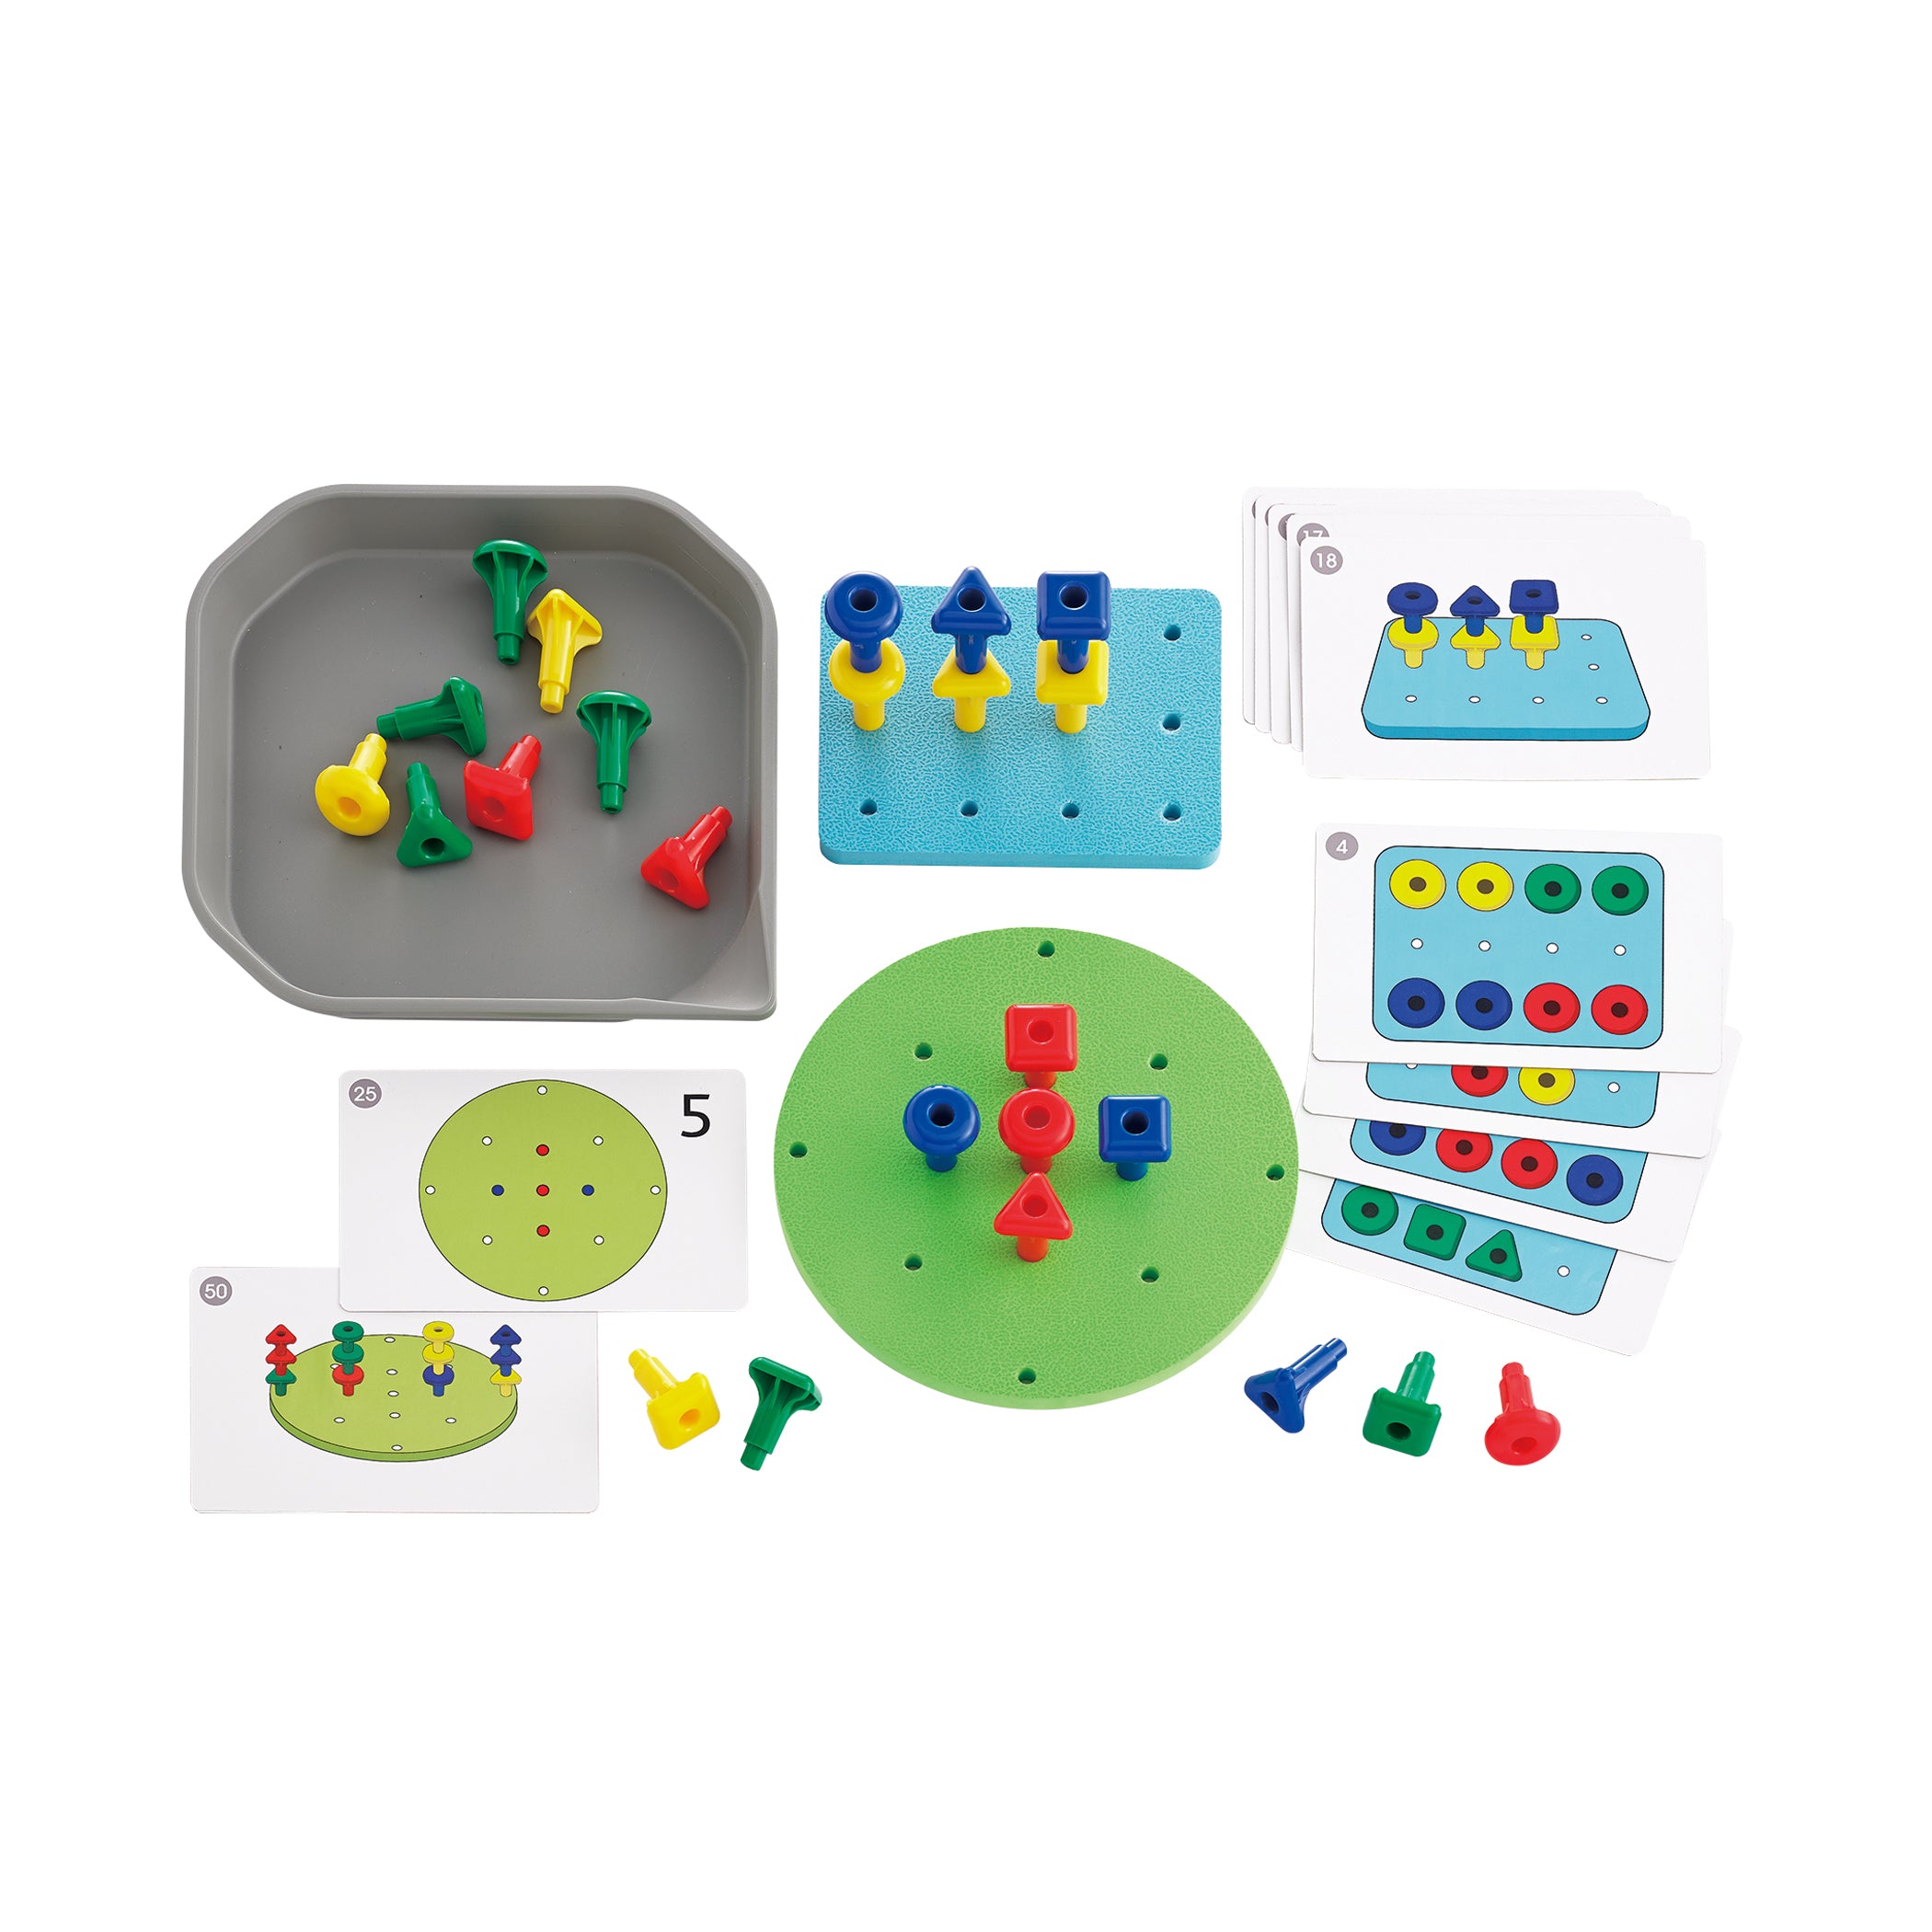 FunPlay Geo Pegs - 18m+ - 24 Plastic Pegs + 2 Pegboards + 50 Activities + Messy Tray - A1 School Supplies